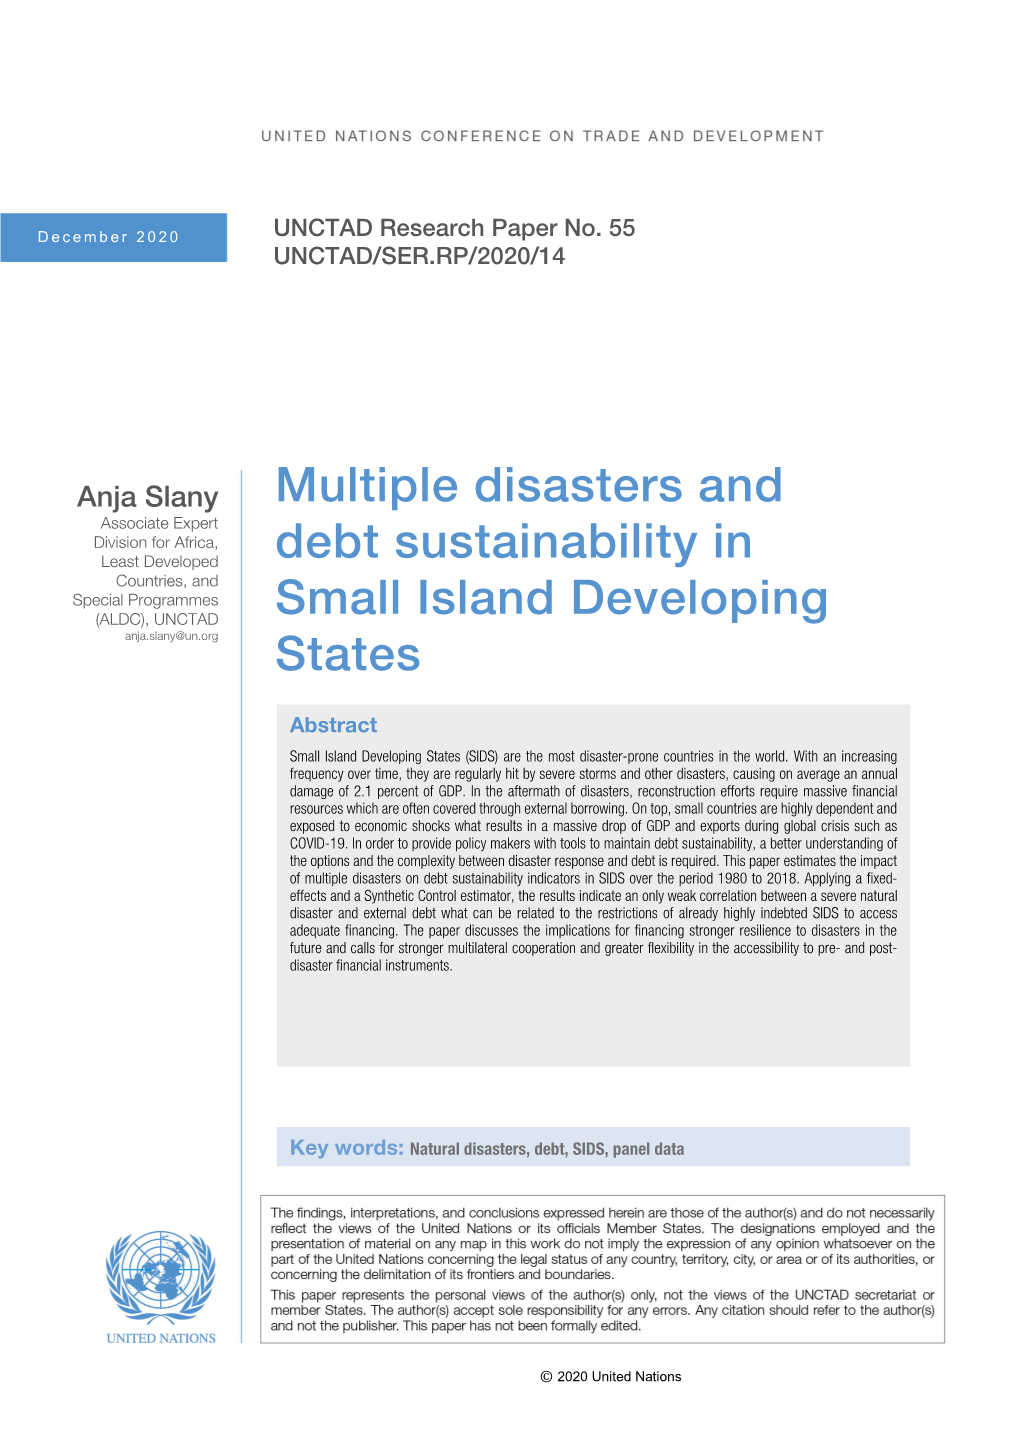 Multiple Disaster and Debt Sustainability in Small Island